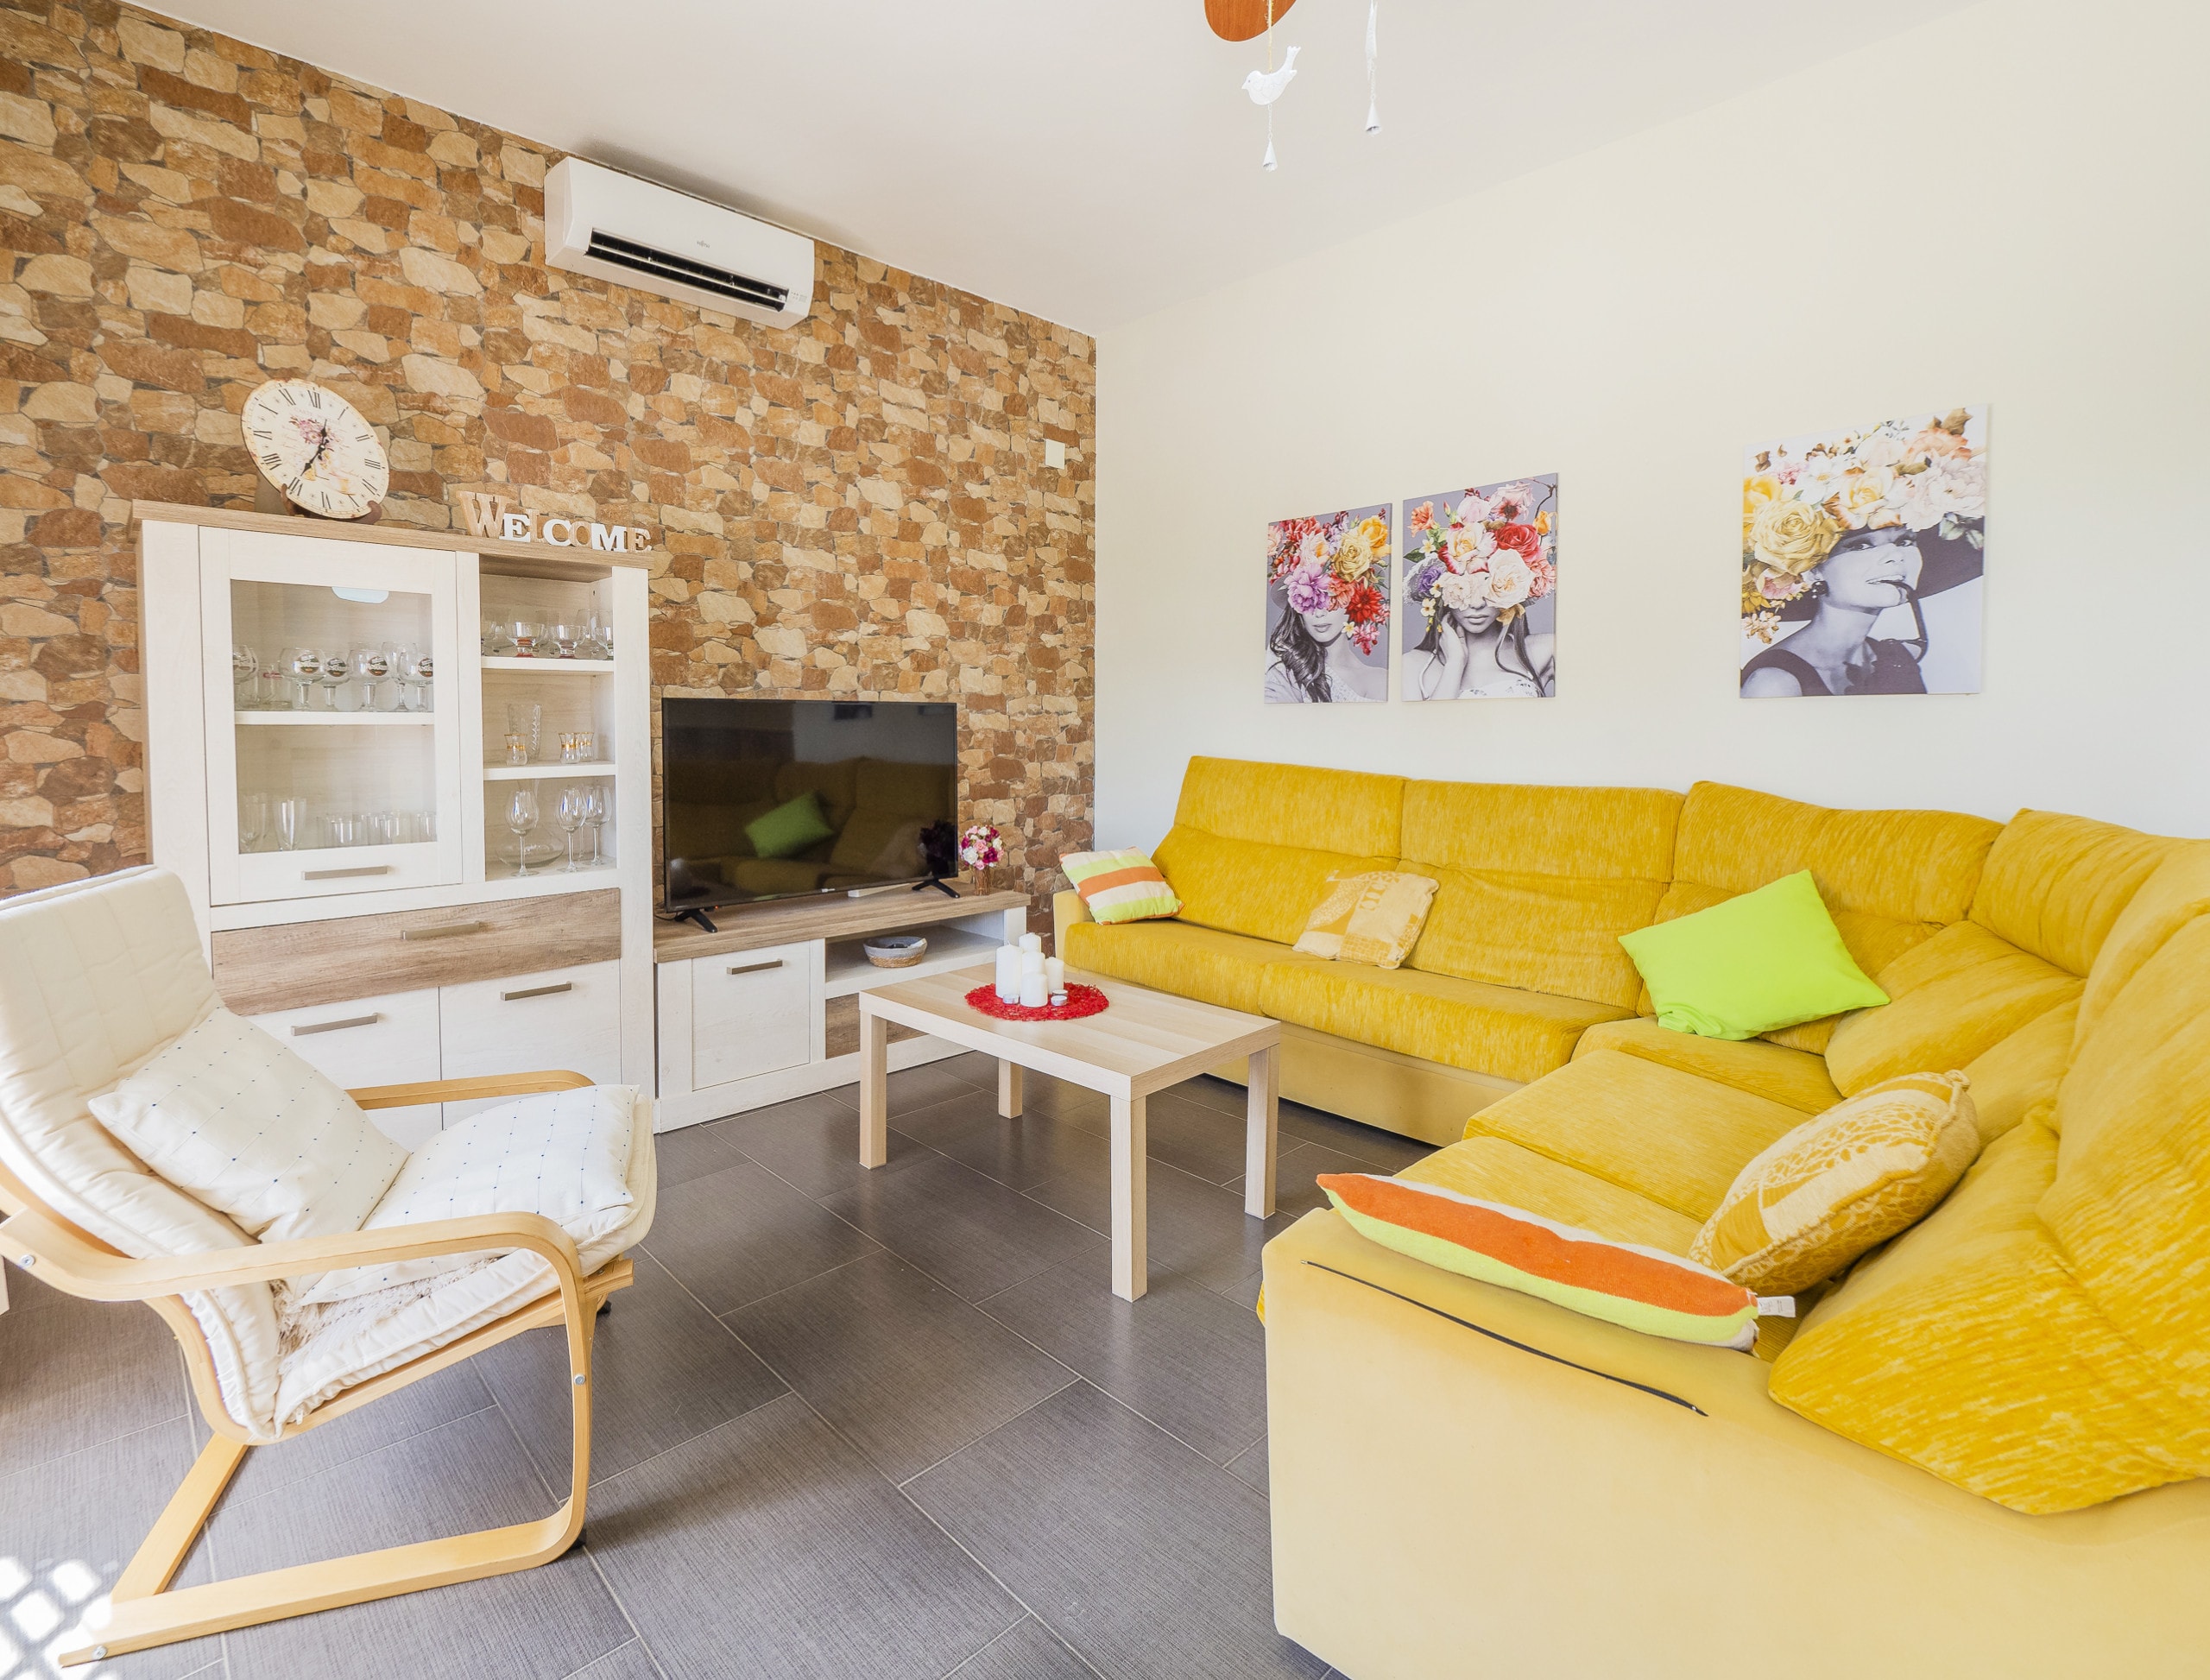 Enjoy the living room of this country house in Alhaurín de la torre